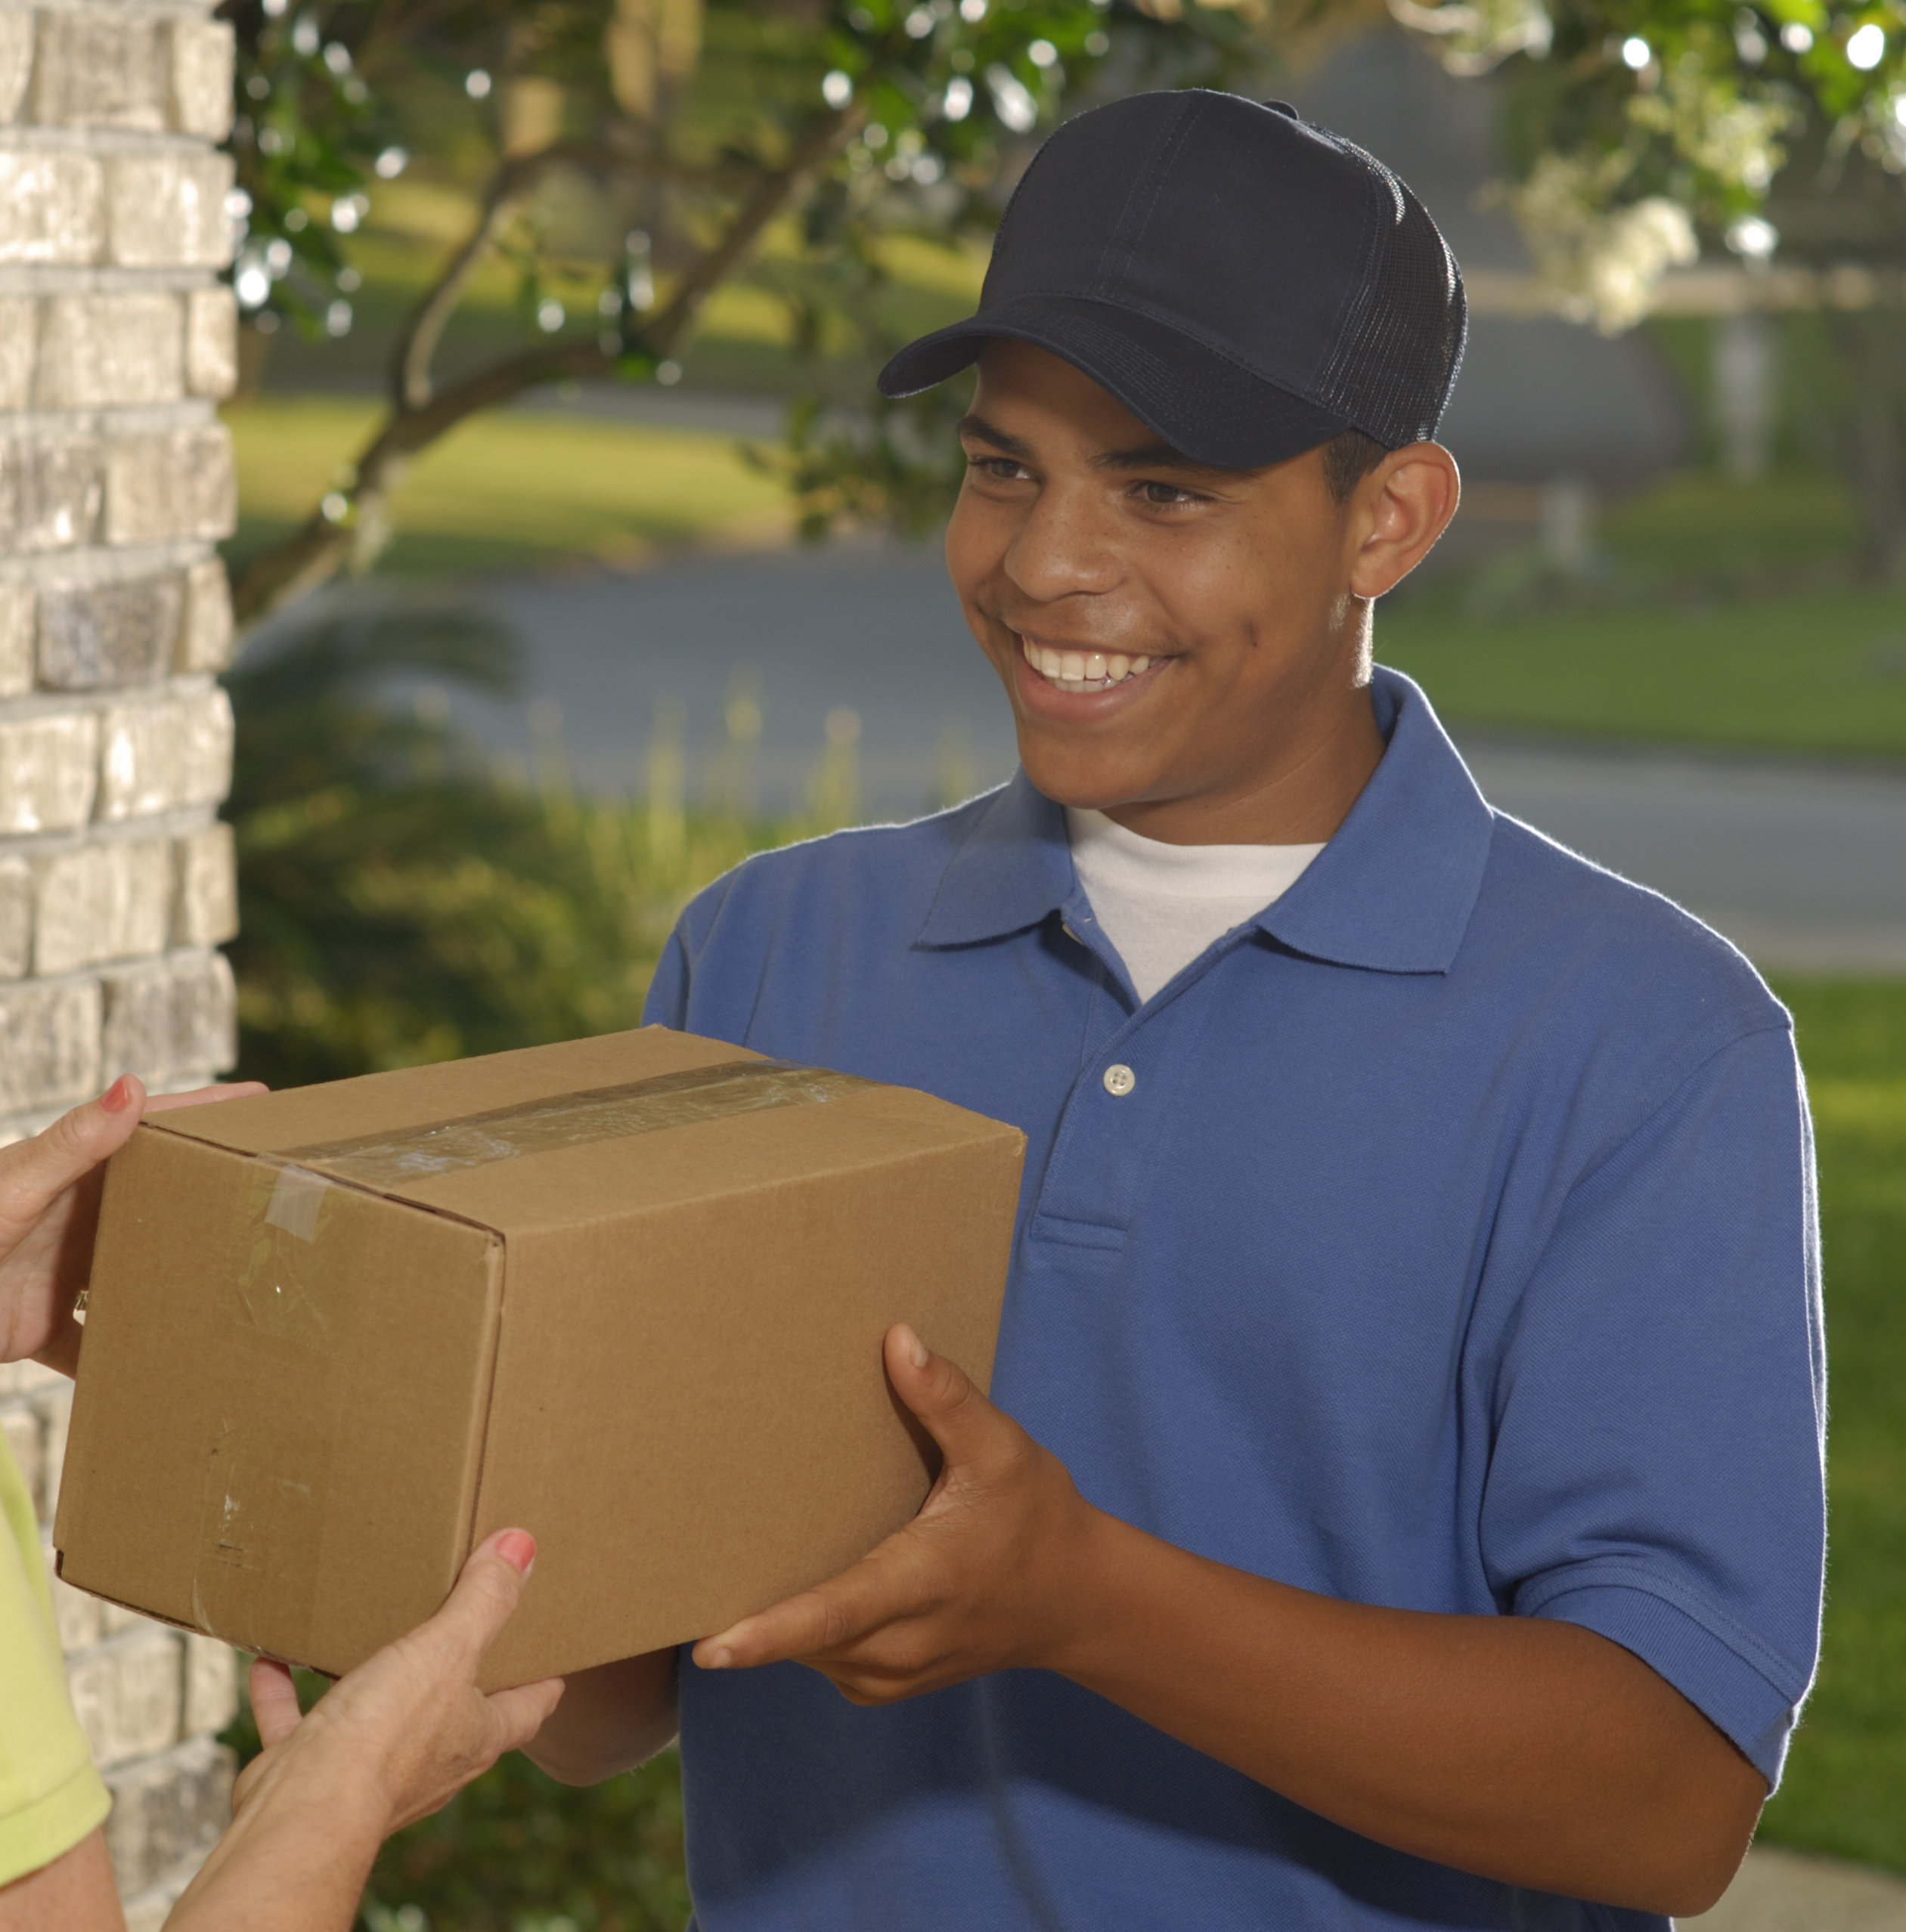 A man delivering a package